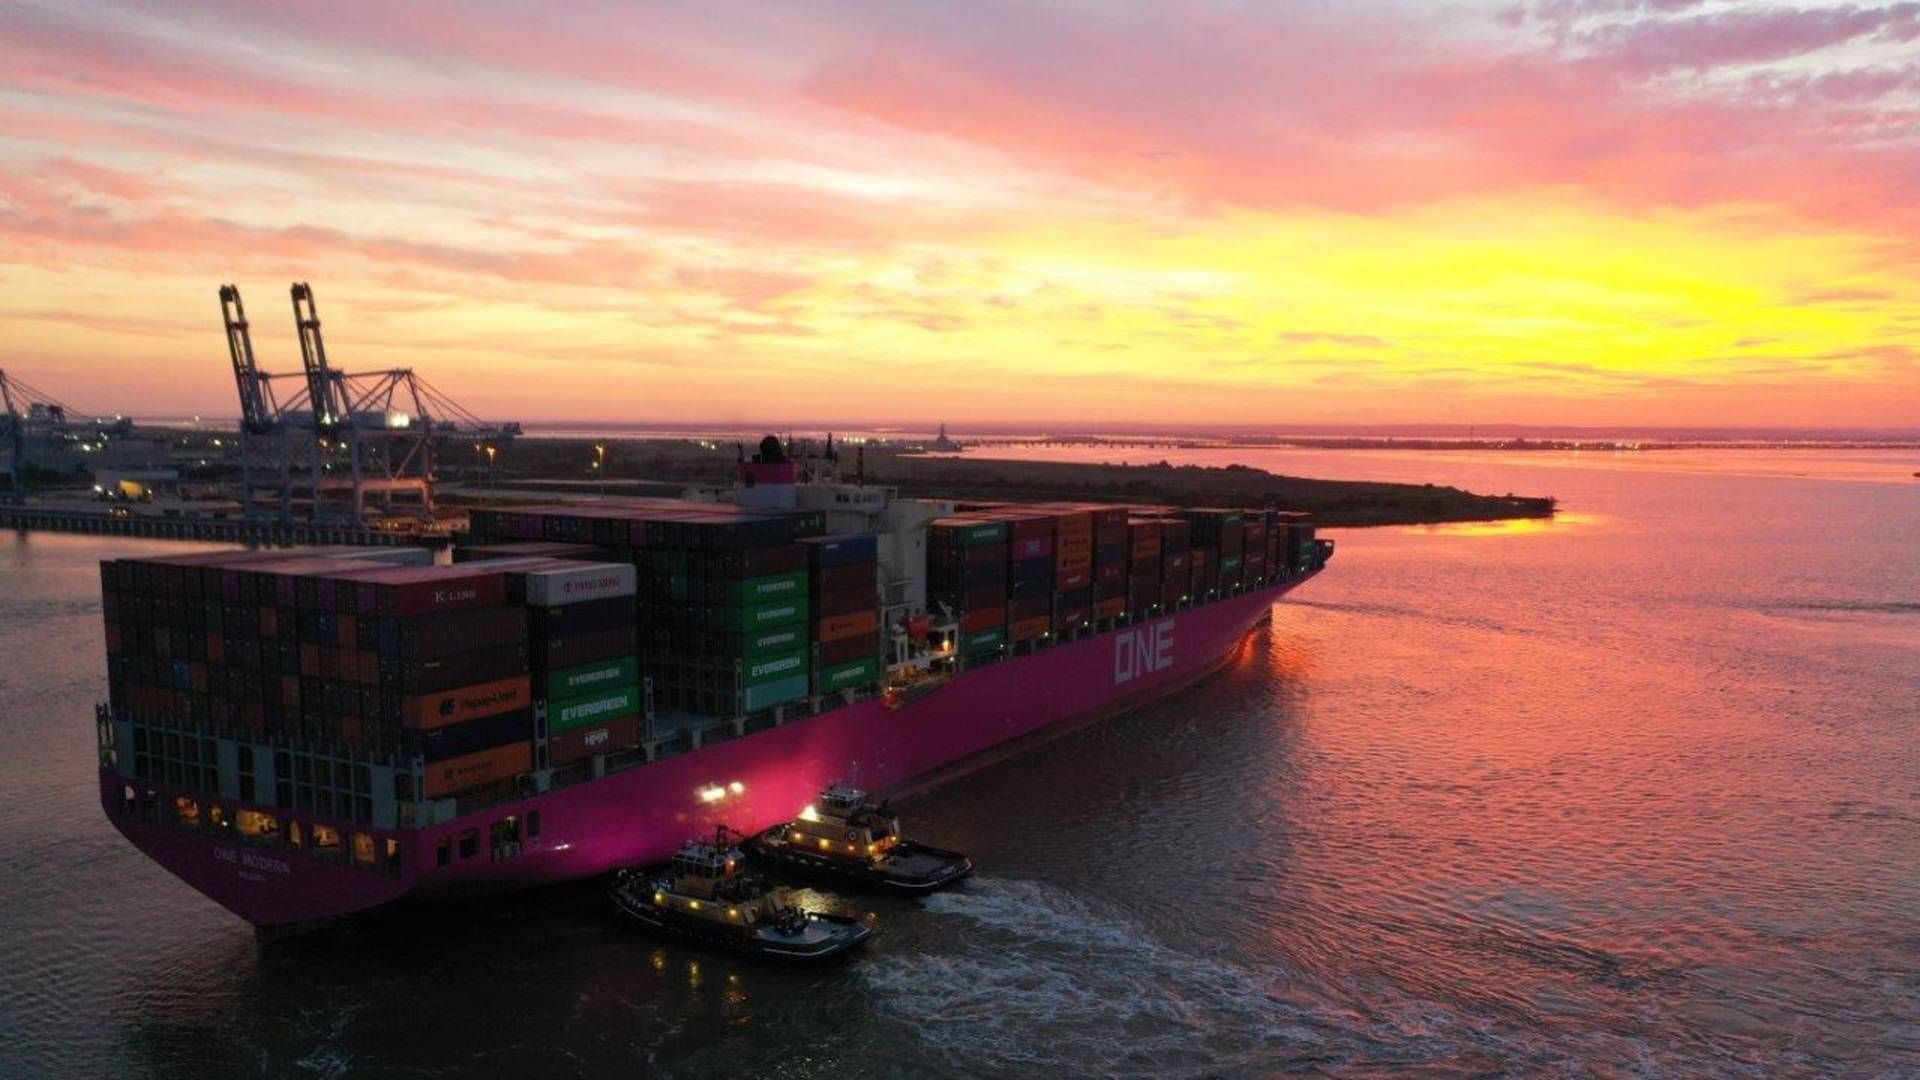 More than 100 container ships wait outside Shanghai